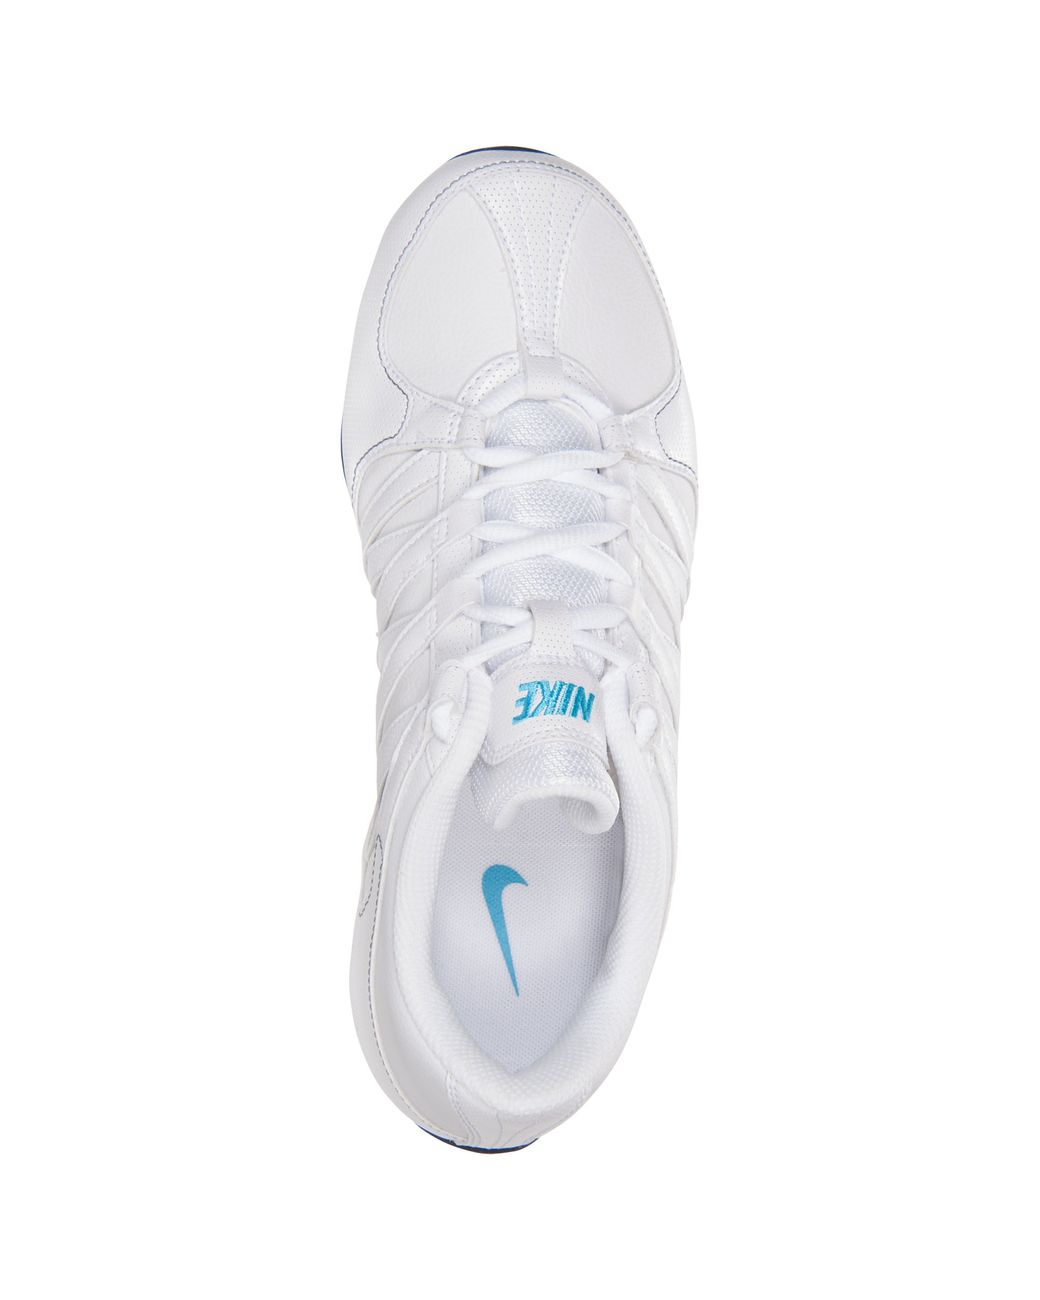 Nike Musique Iv Dance Sneakers in White | Lyst